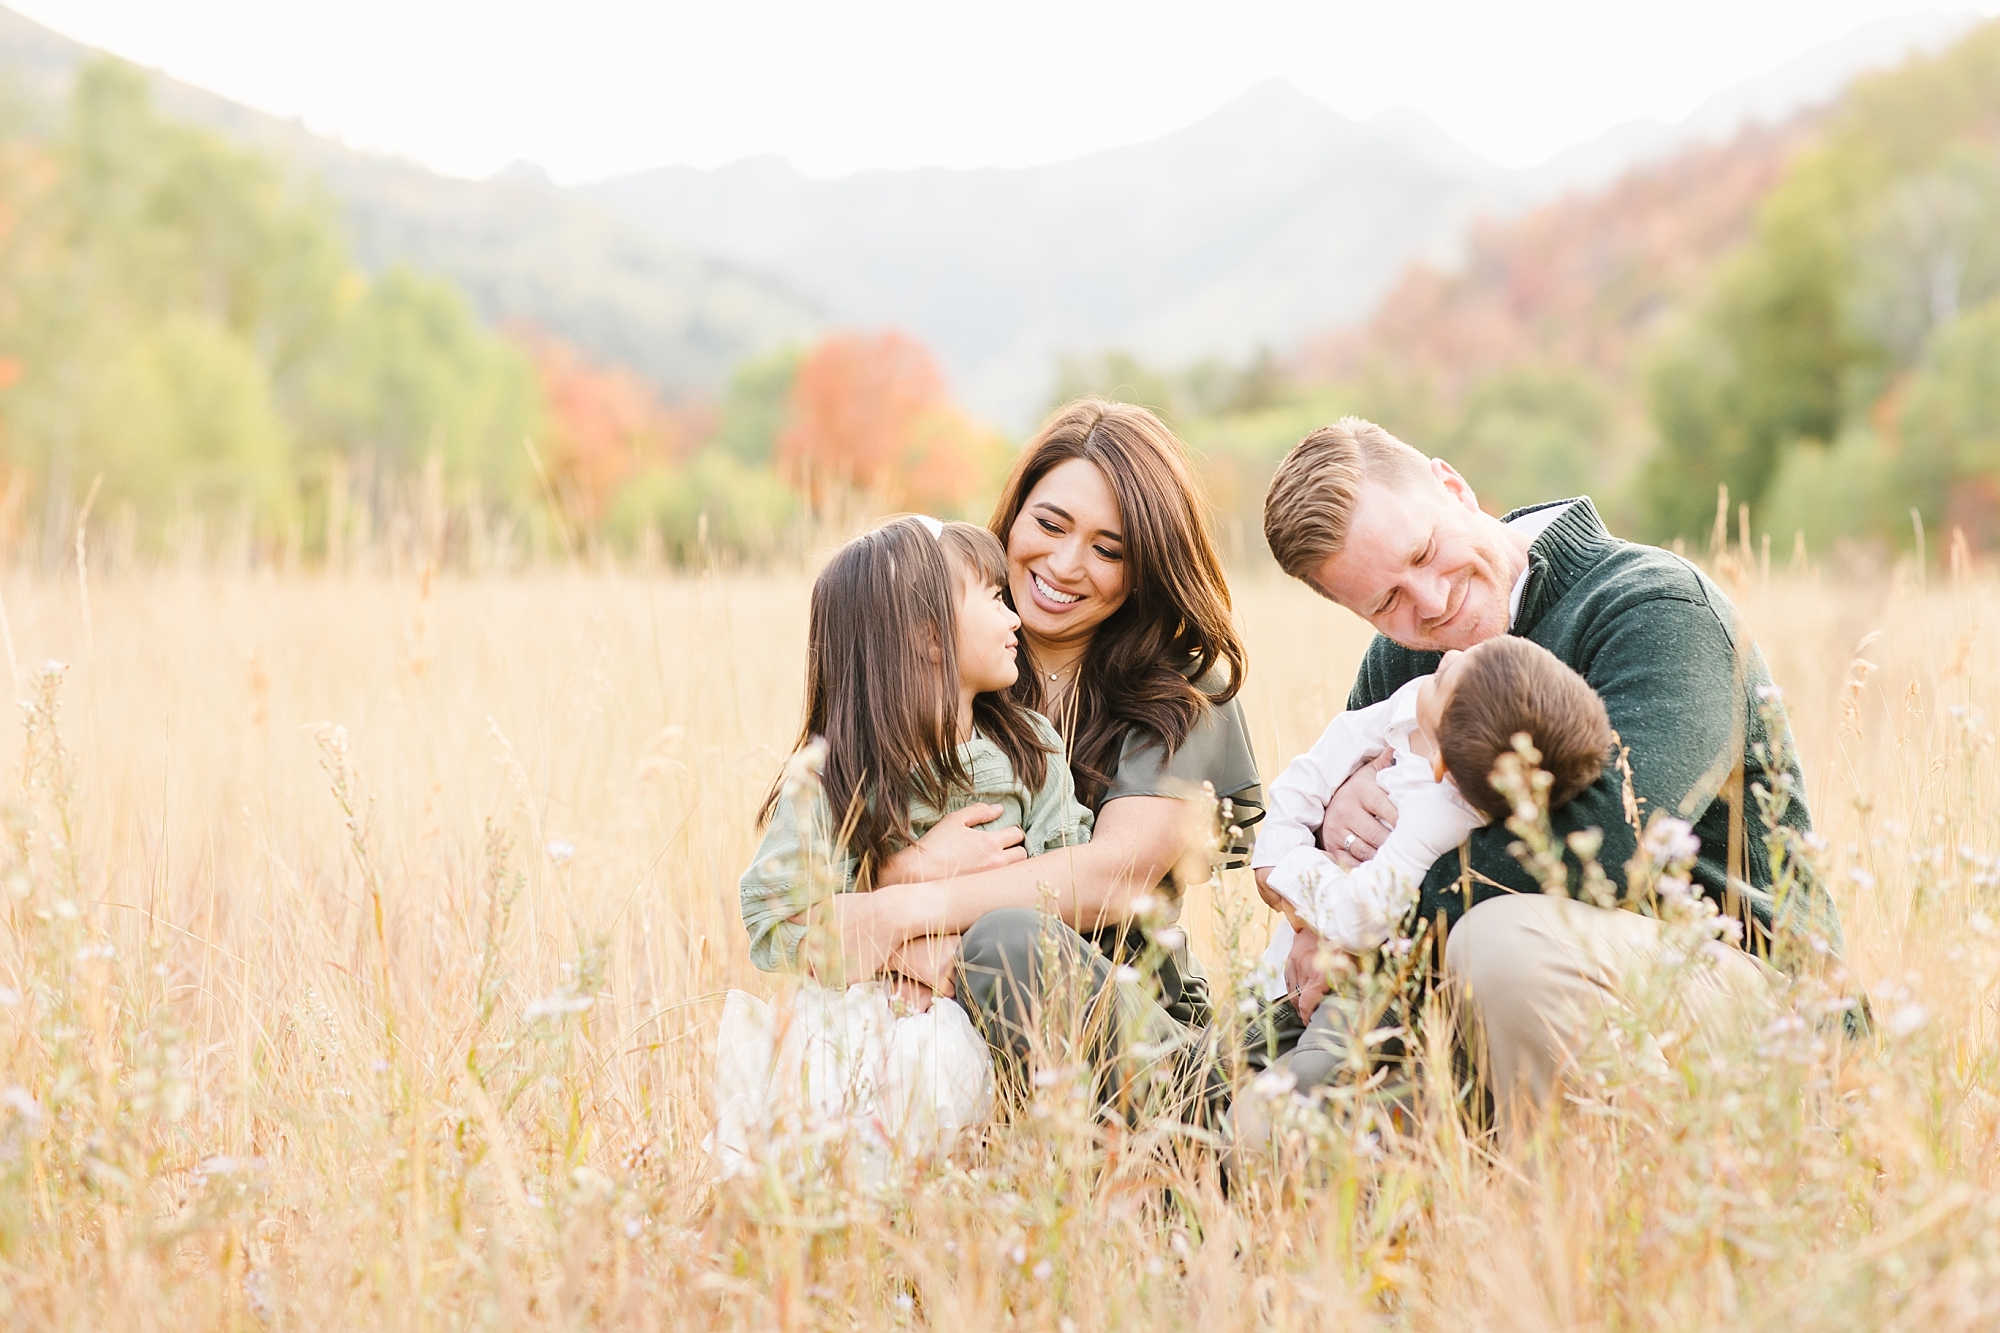 Fall is the perfect time for your family photos!!